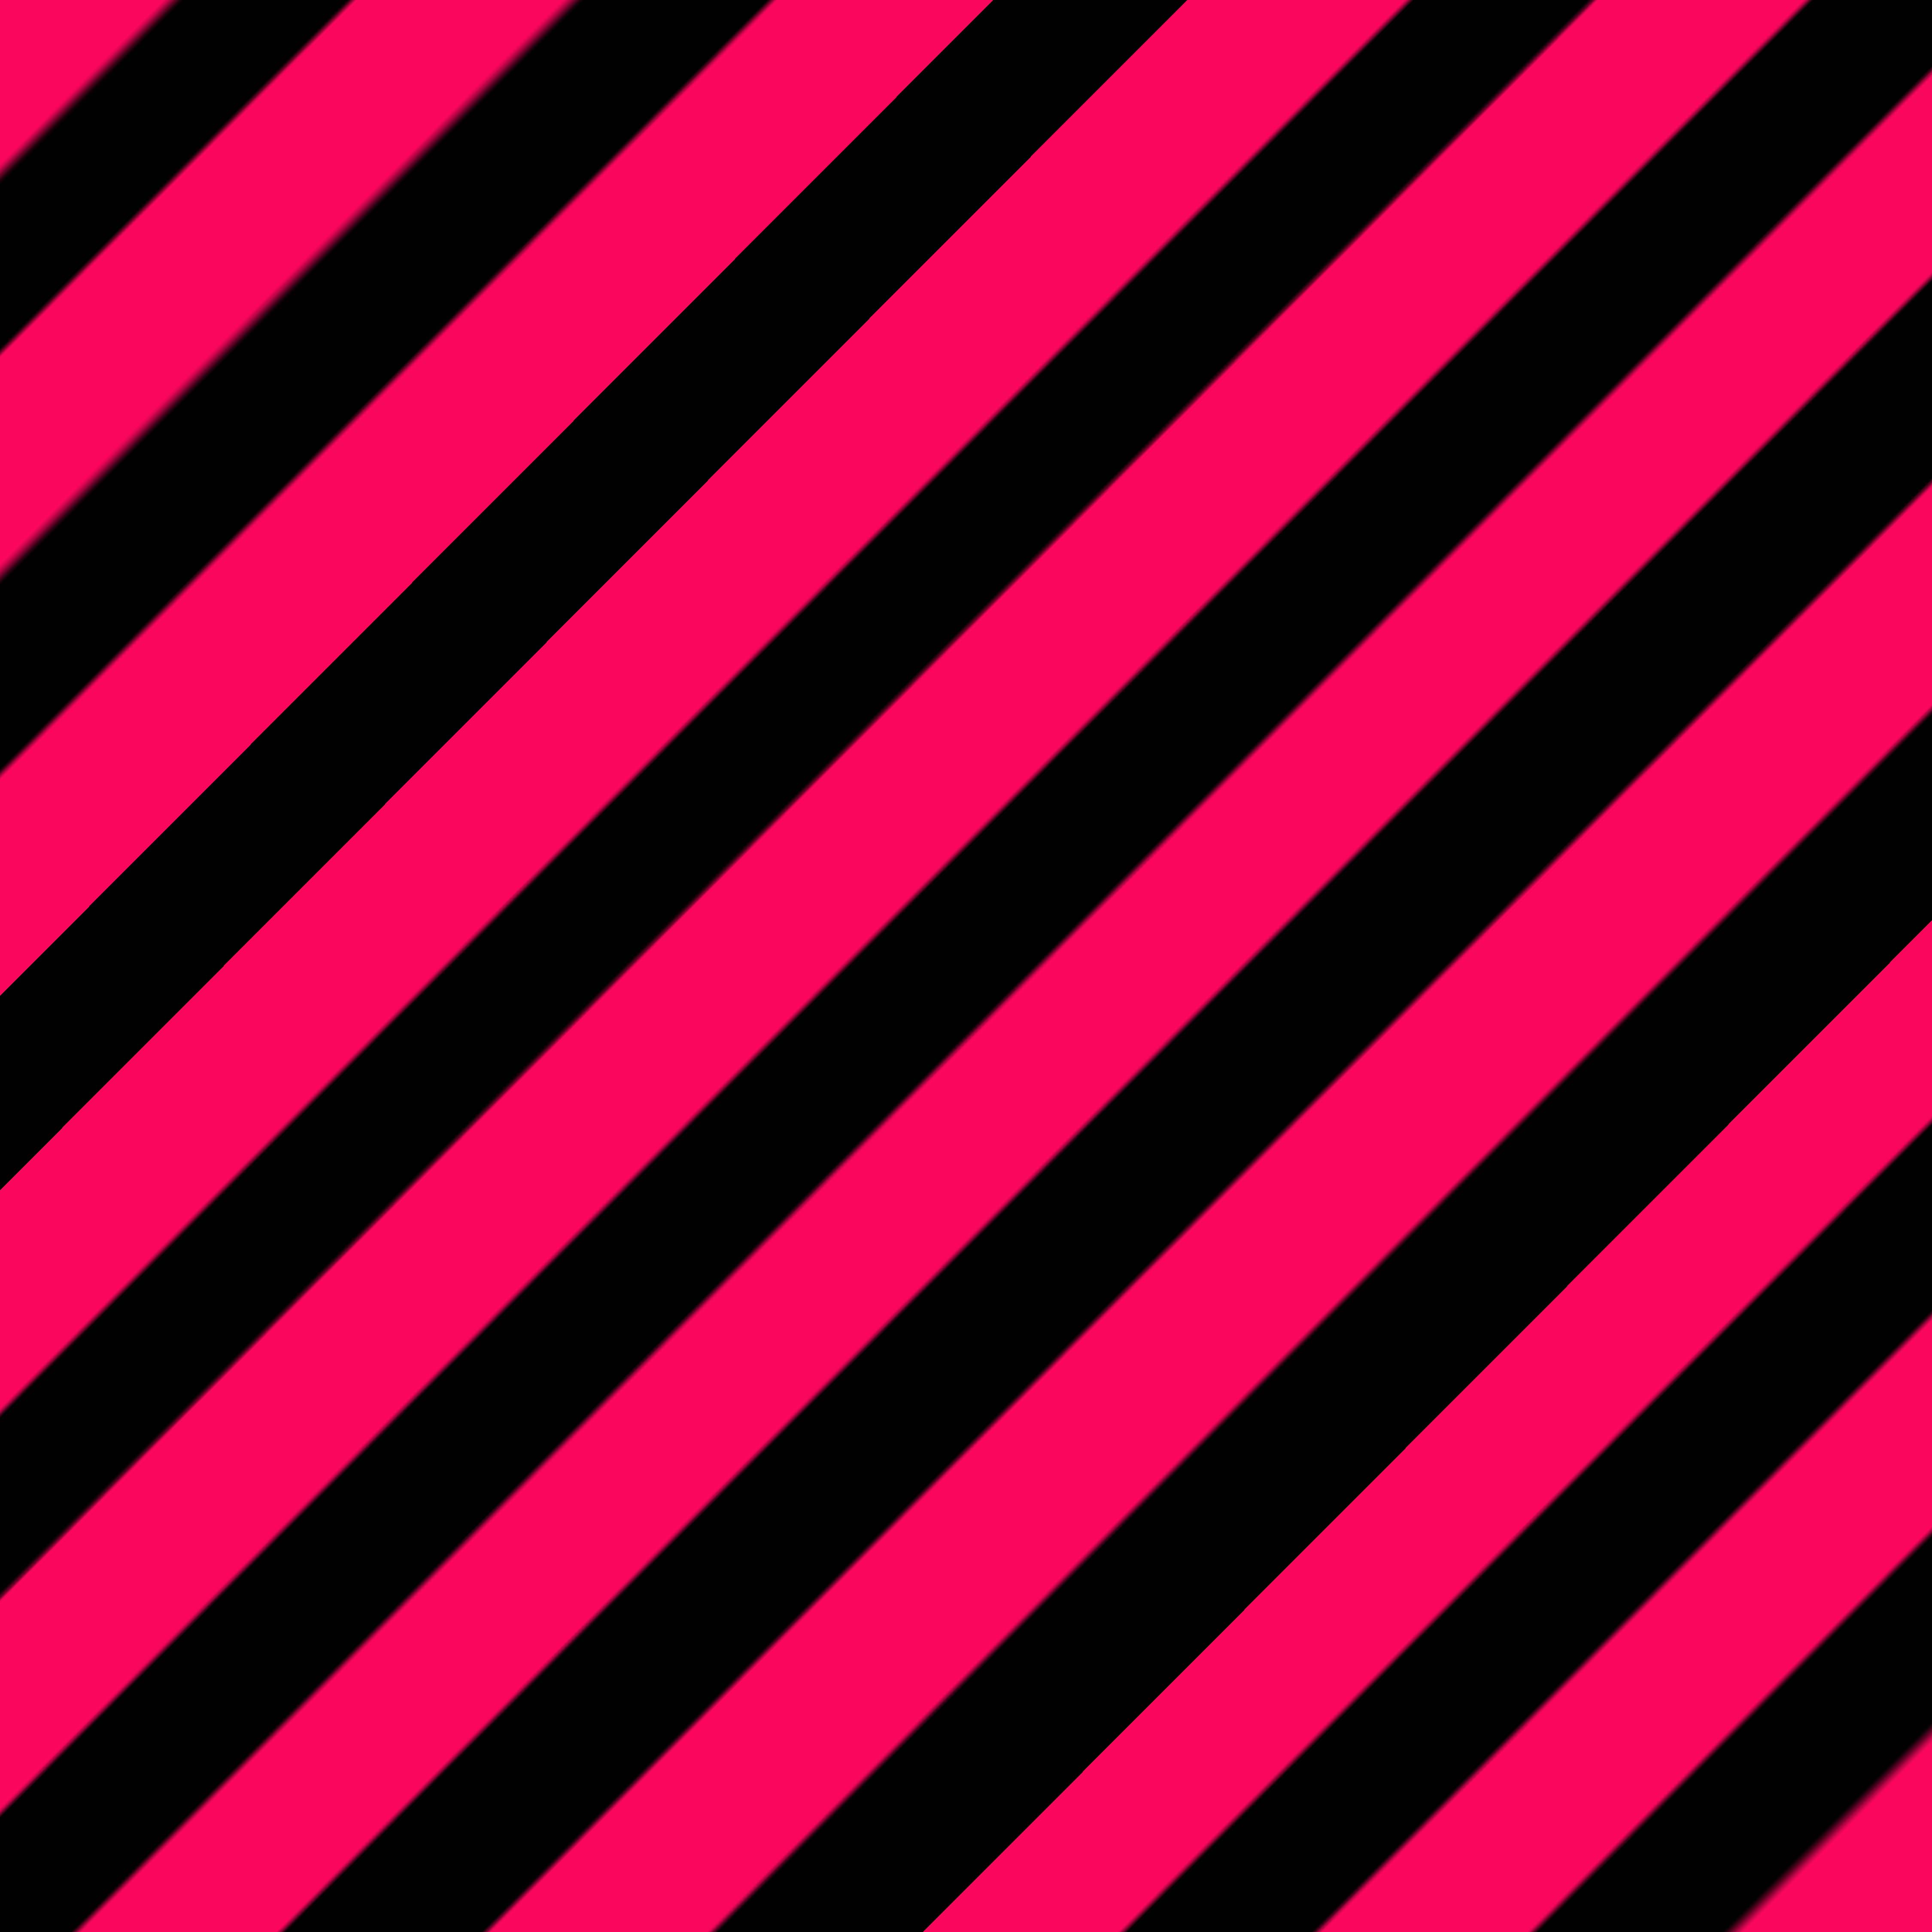 Wallpaper For > Tumblr Background Pink And Black